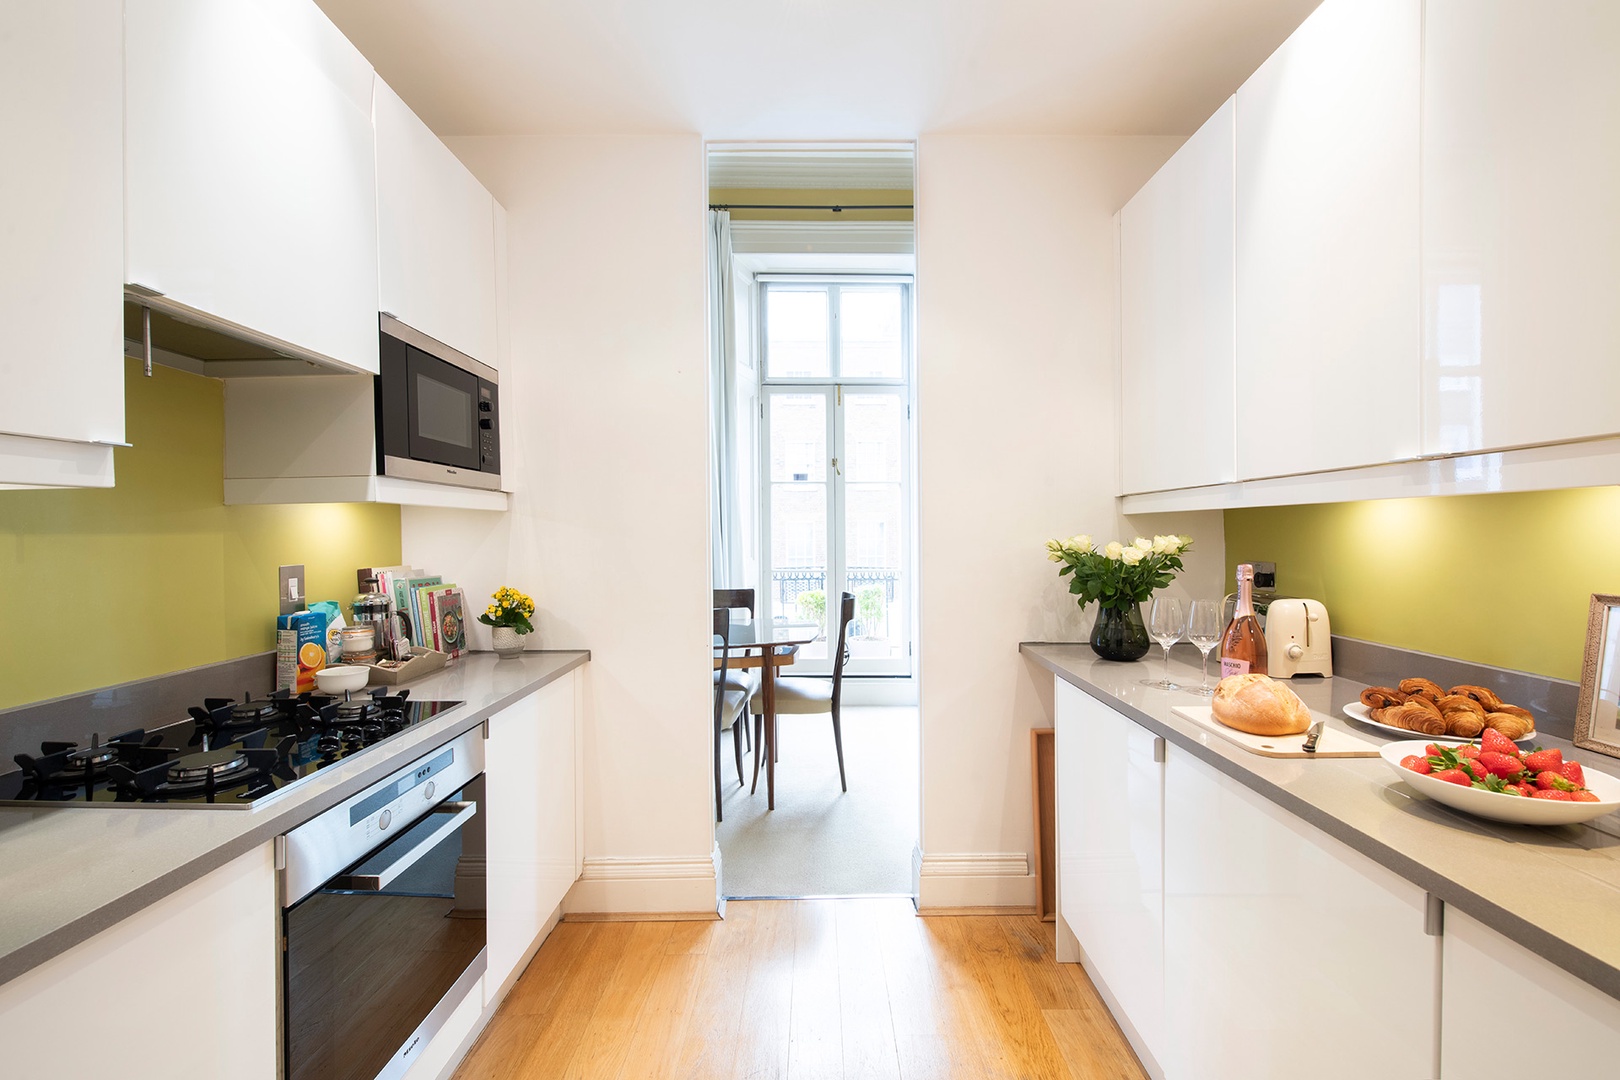 Kitchen is conveniently located just off dining area